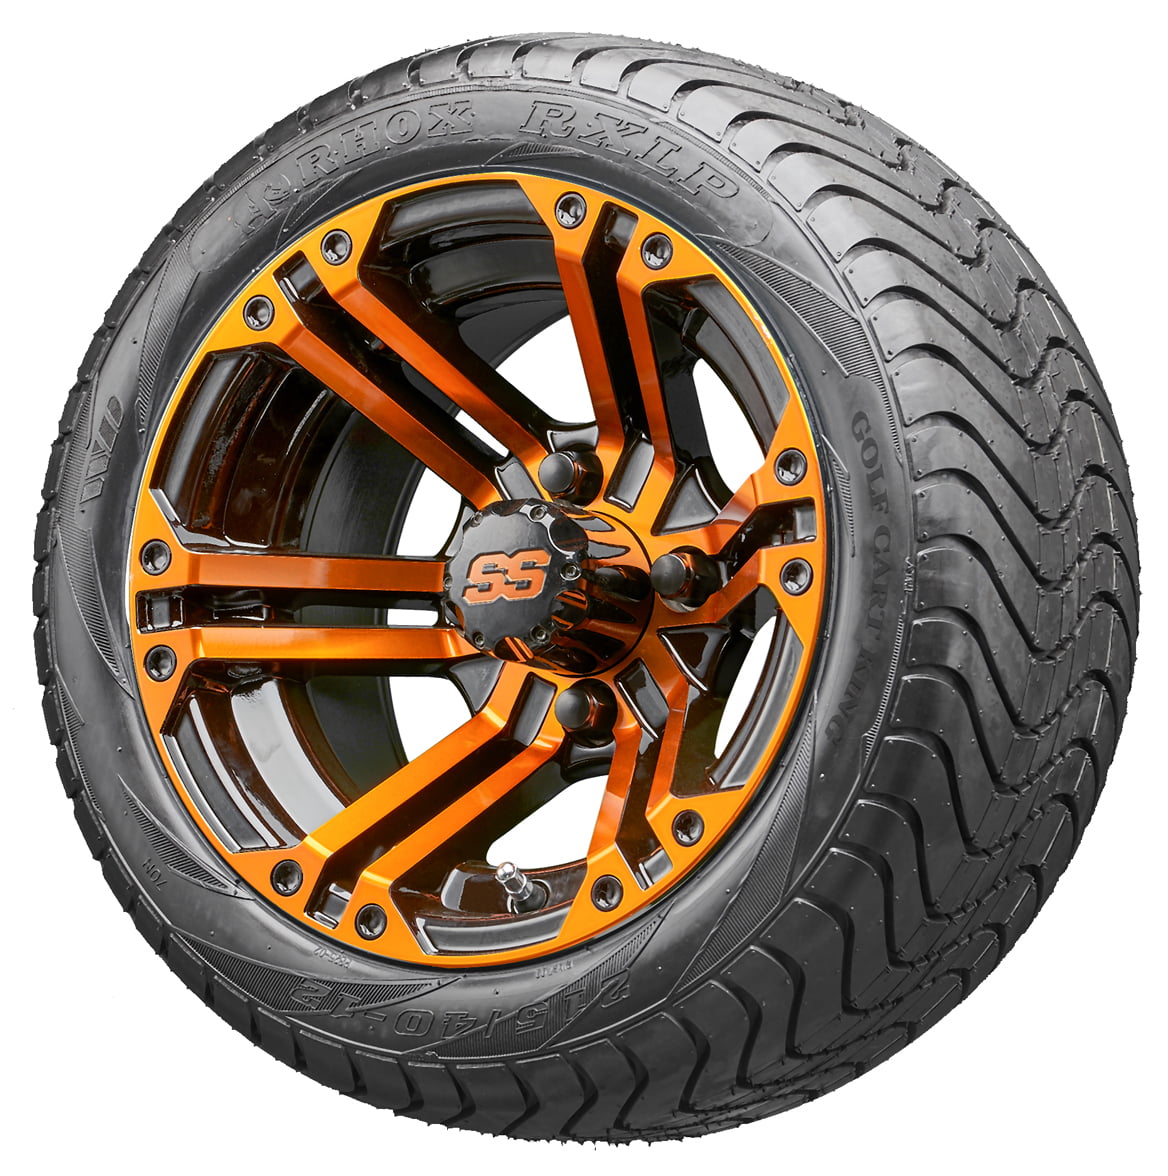 Golf Cart Wheels And Tires Combo 12 Rhox Rx334 Bo Orange And Black ...